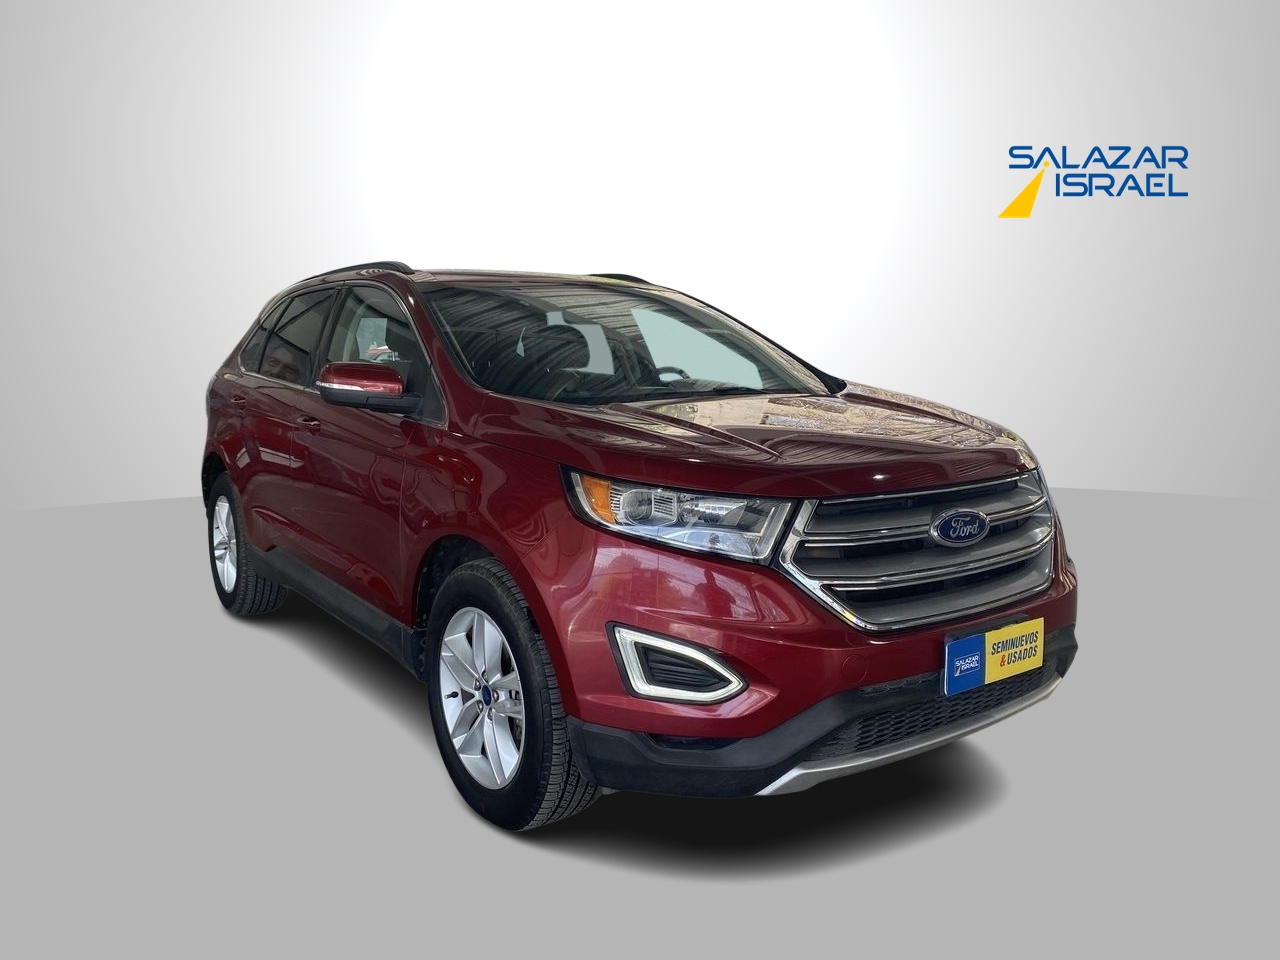 FORD EDGE 2.0 SEL ECOBOOSTL FWD AT 5P 2018